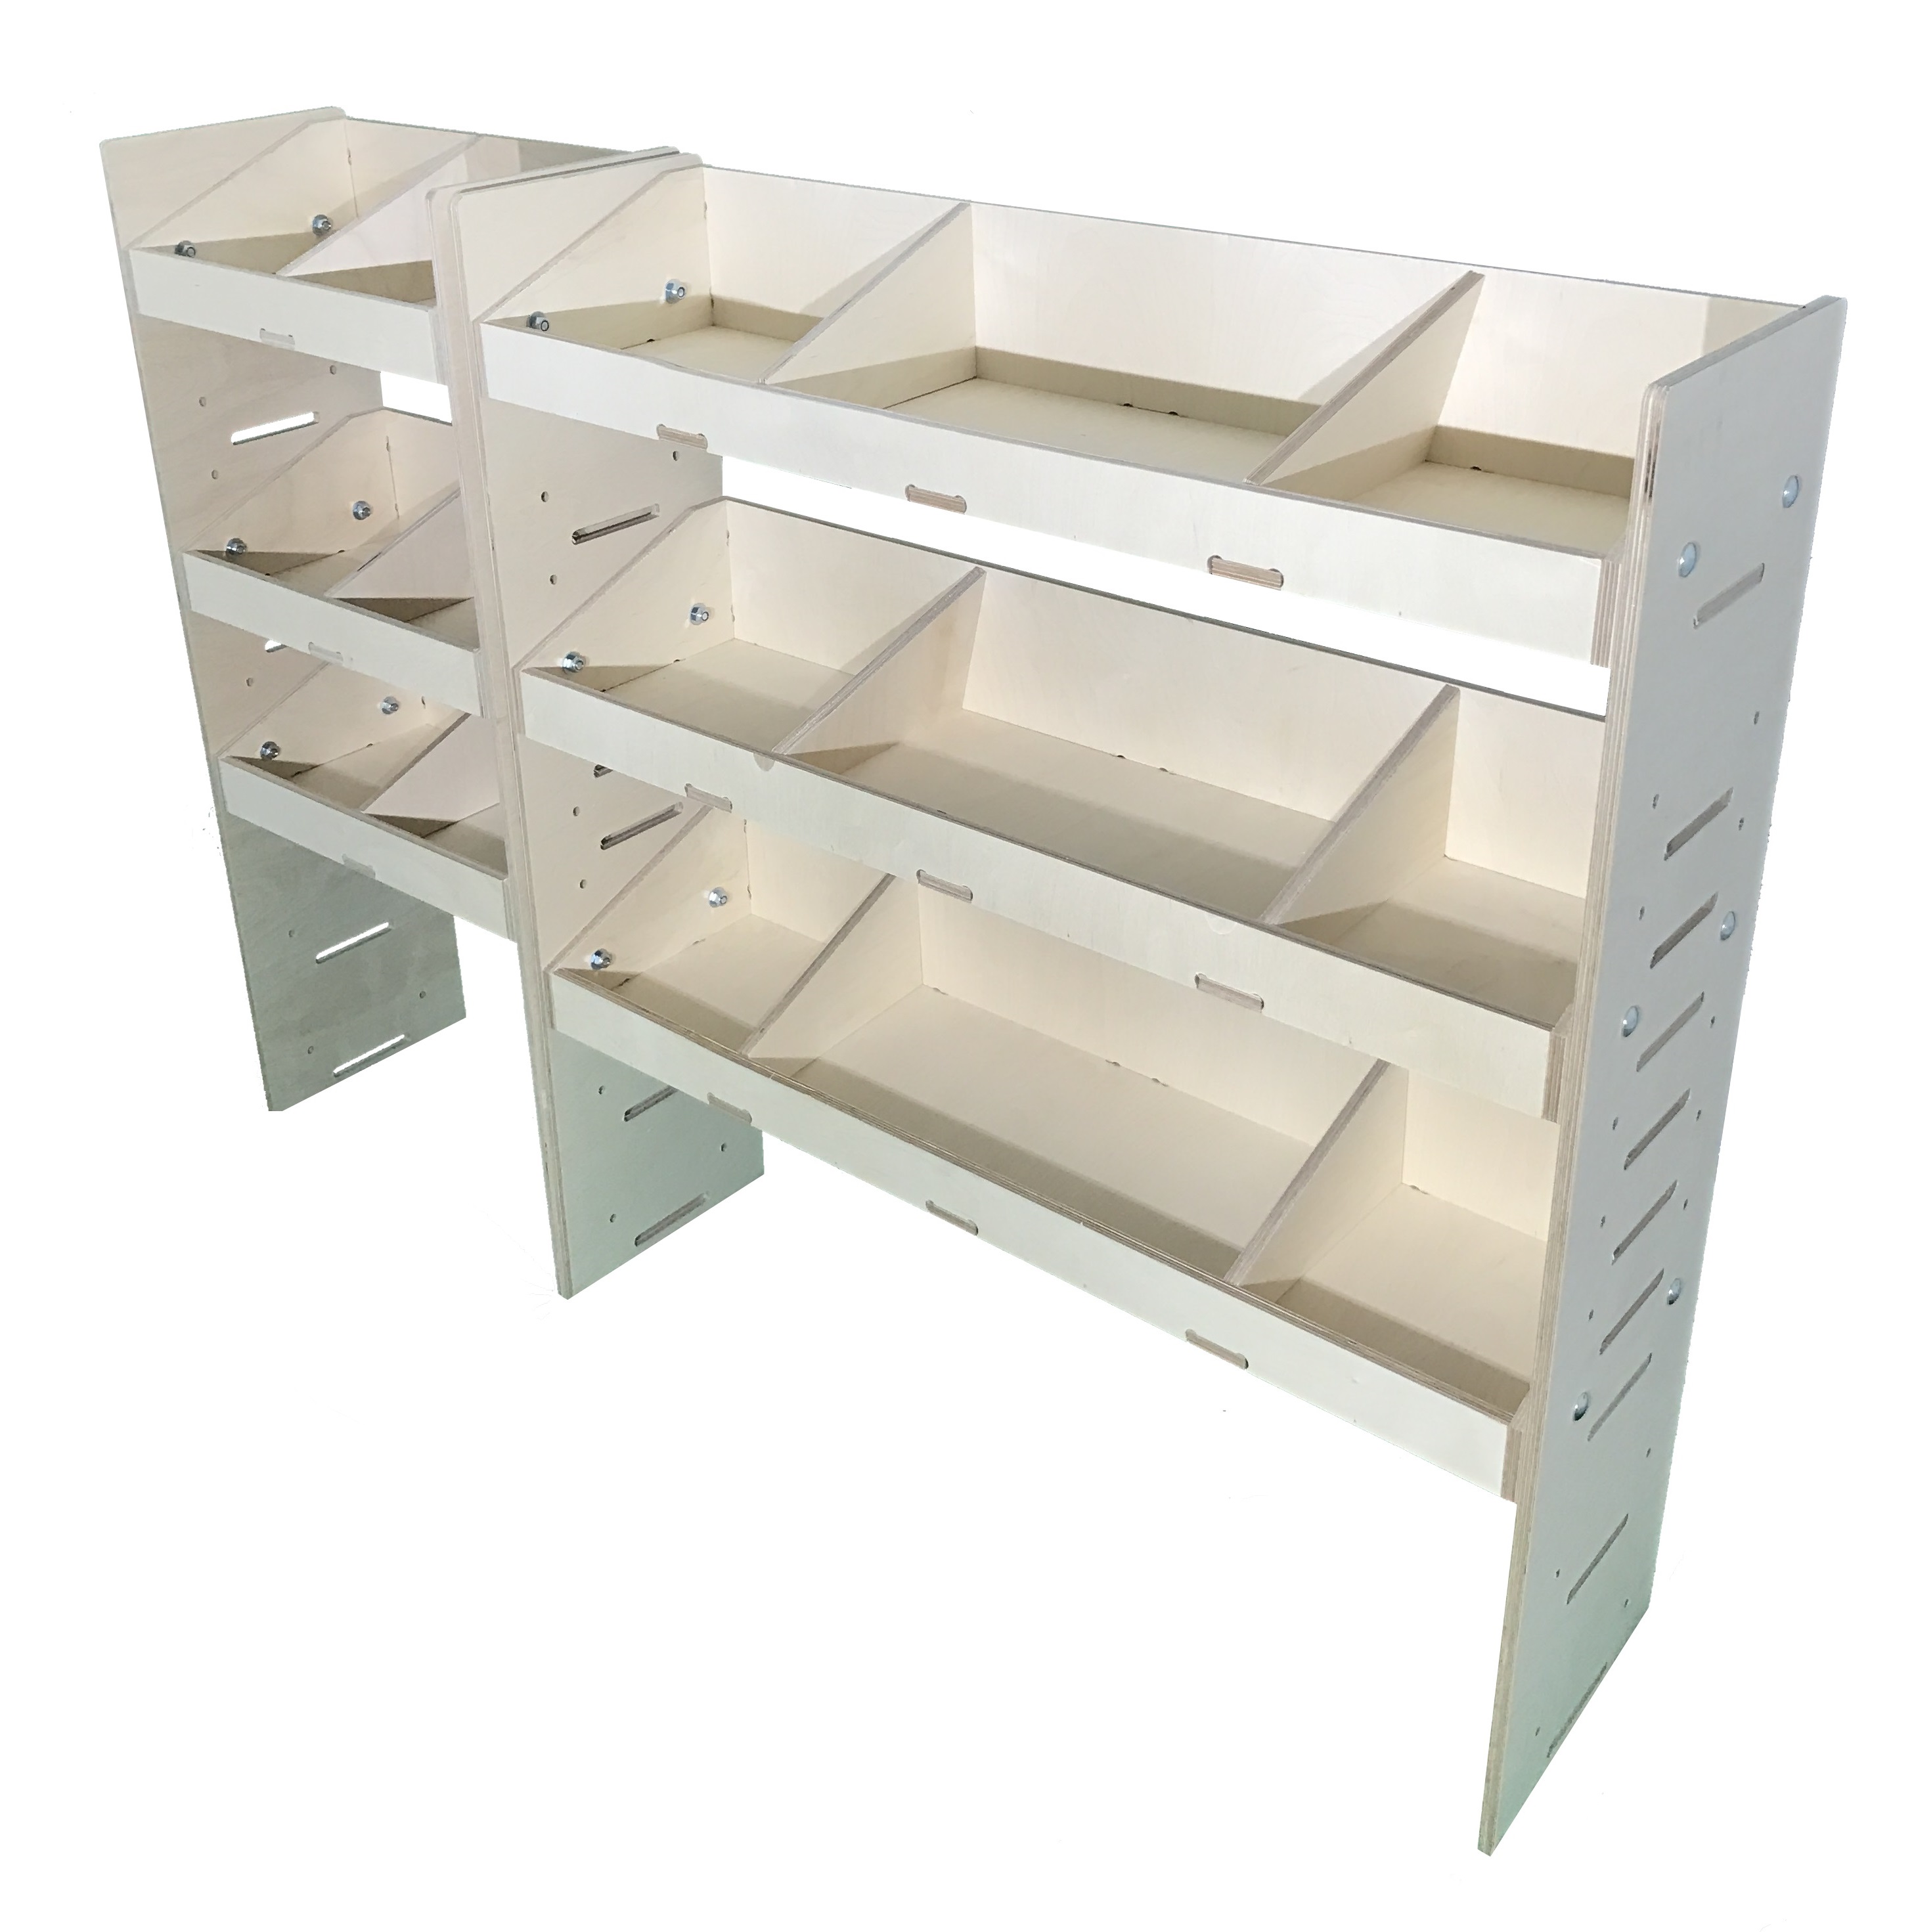 1000mm and 500mm Shelving Combination Examplea